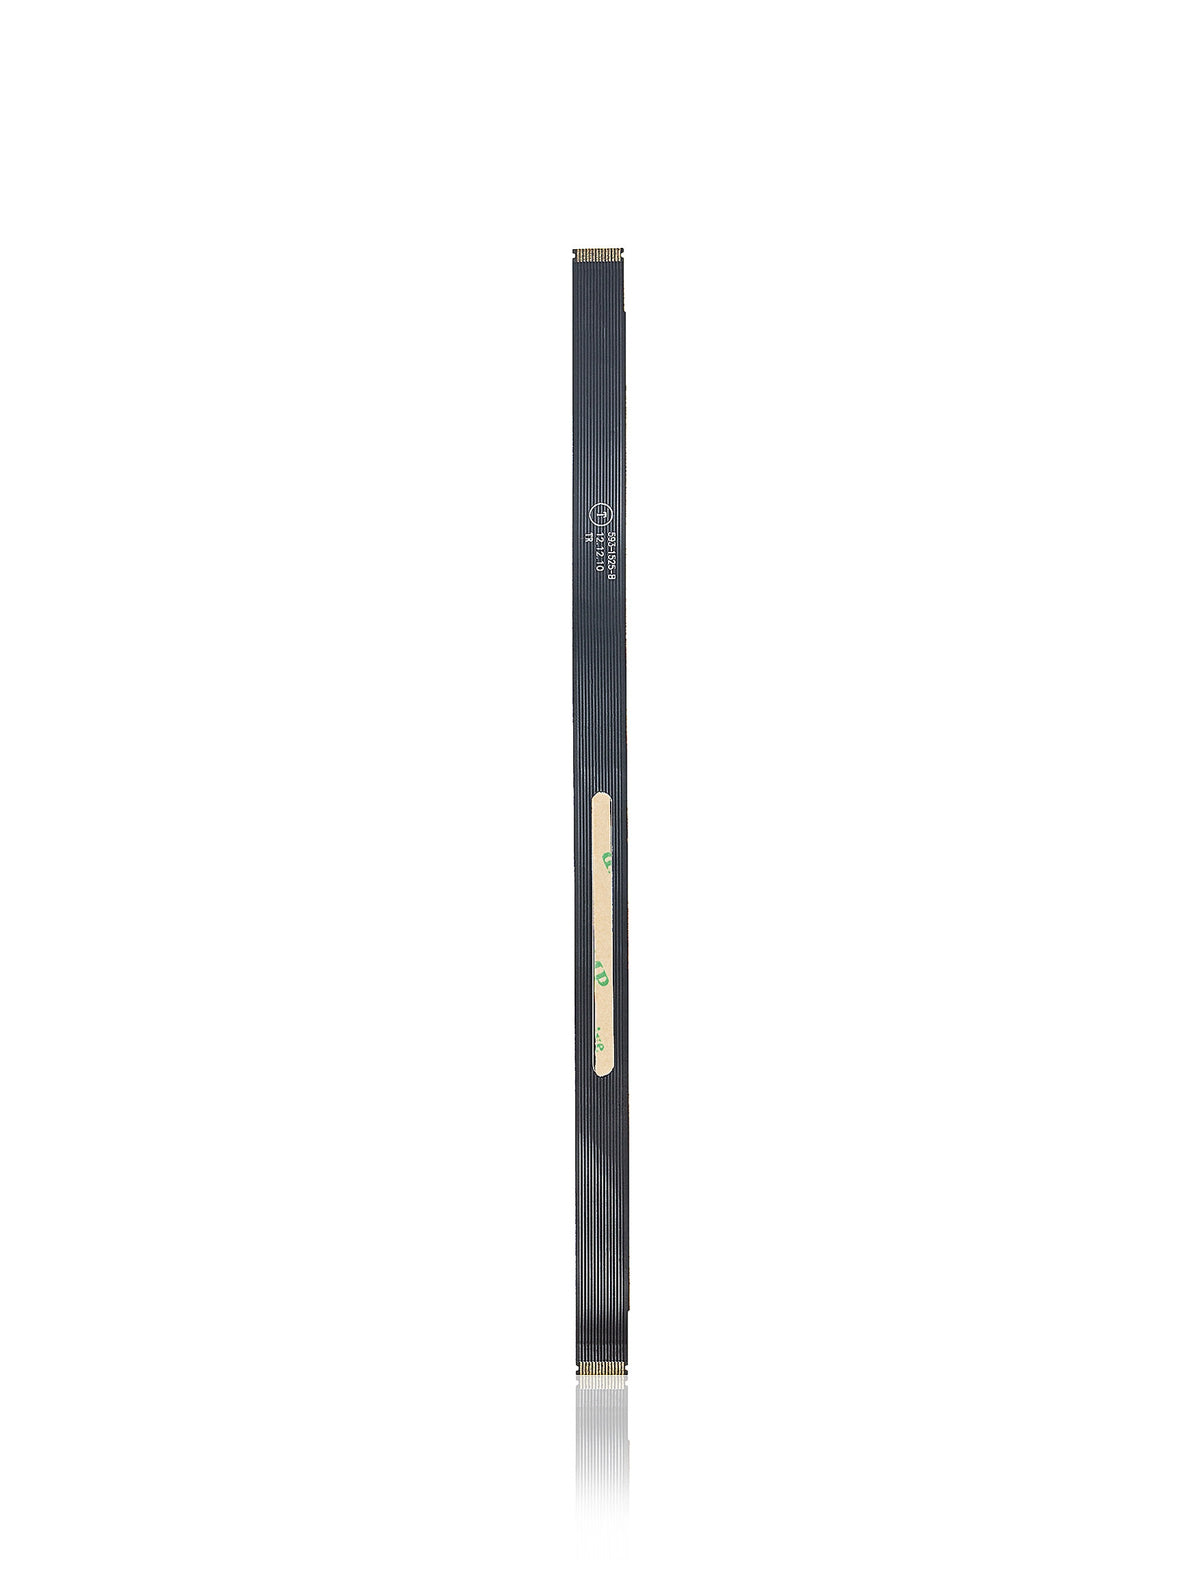 IPD TRACKPAD FLEX CABLE COMPATIBLE FOR MACBOOK AIR 11" A1370 ( LATE 2010 / MID 2011 ) A1465 ( MID 2012)